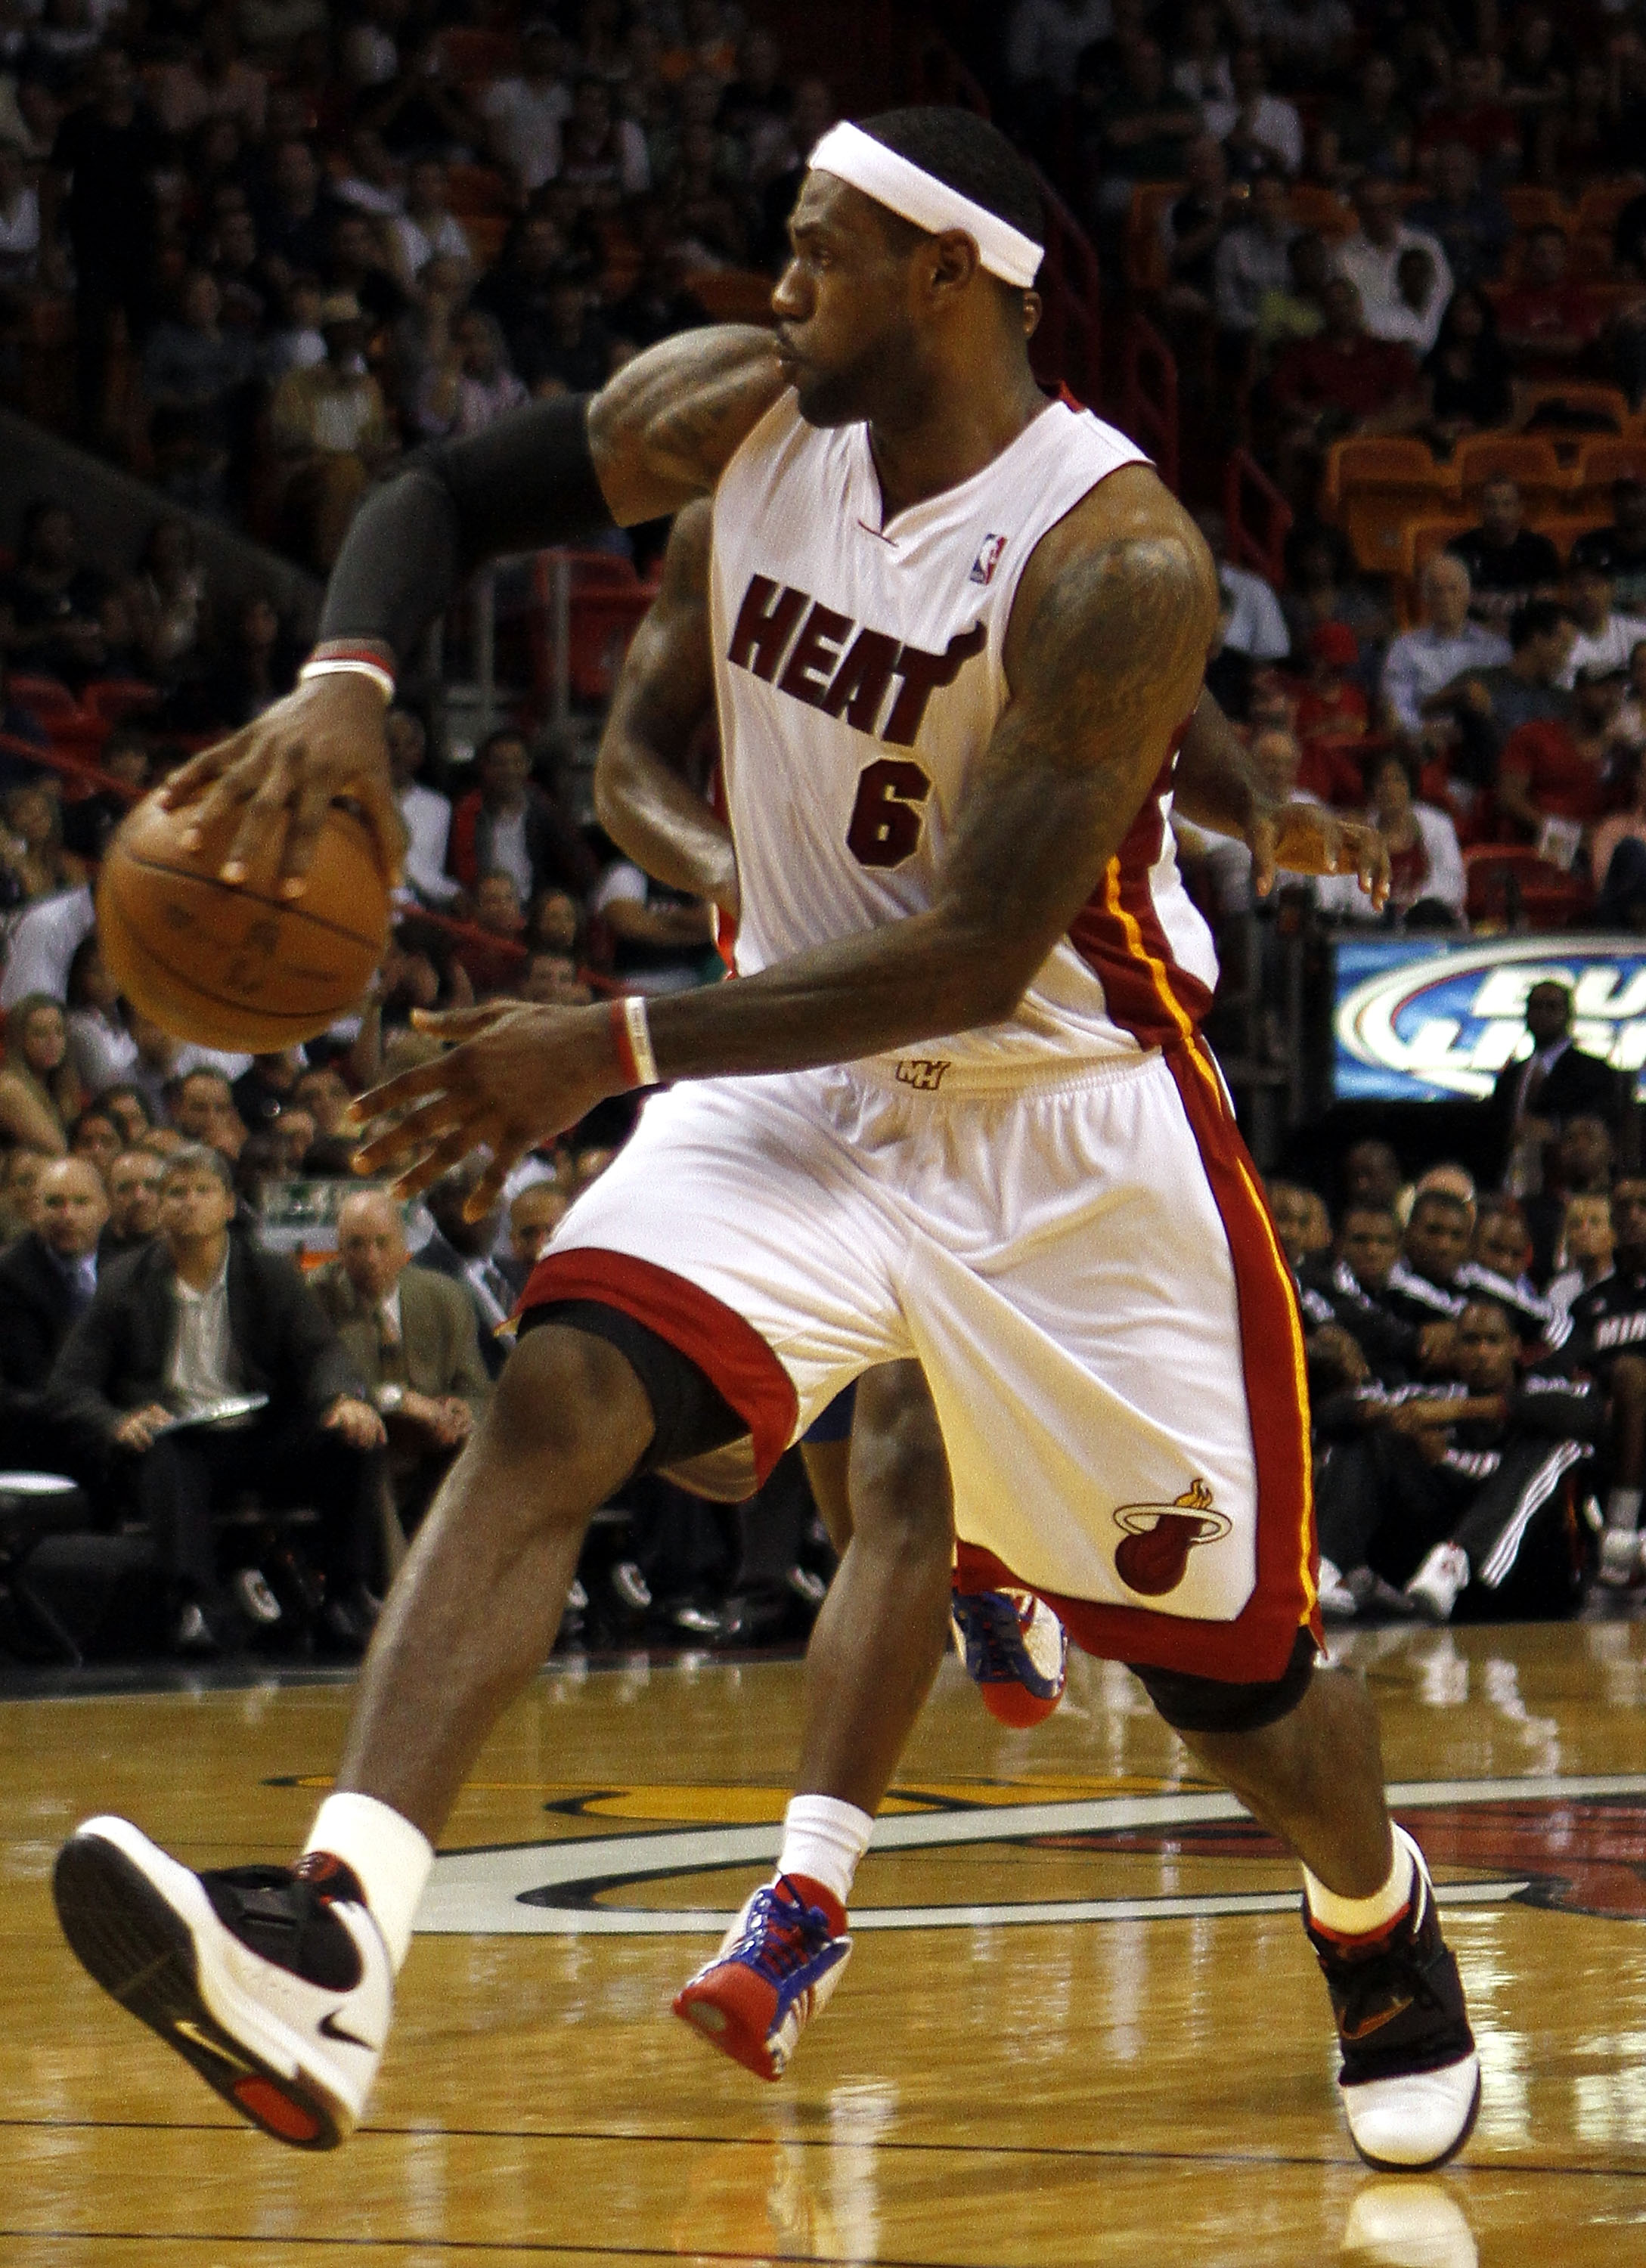 MIAMI - OCTOBER 05:  Forward LeBron James #6 plays against the Detroit Pistons on October 5, 2010 in Miami, Florida.  NOTE TO USER: User expressly acknowledges and agrees that, by downloading and or using this photograph, User is consenting to the terms a